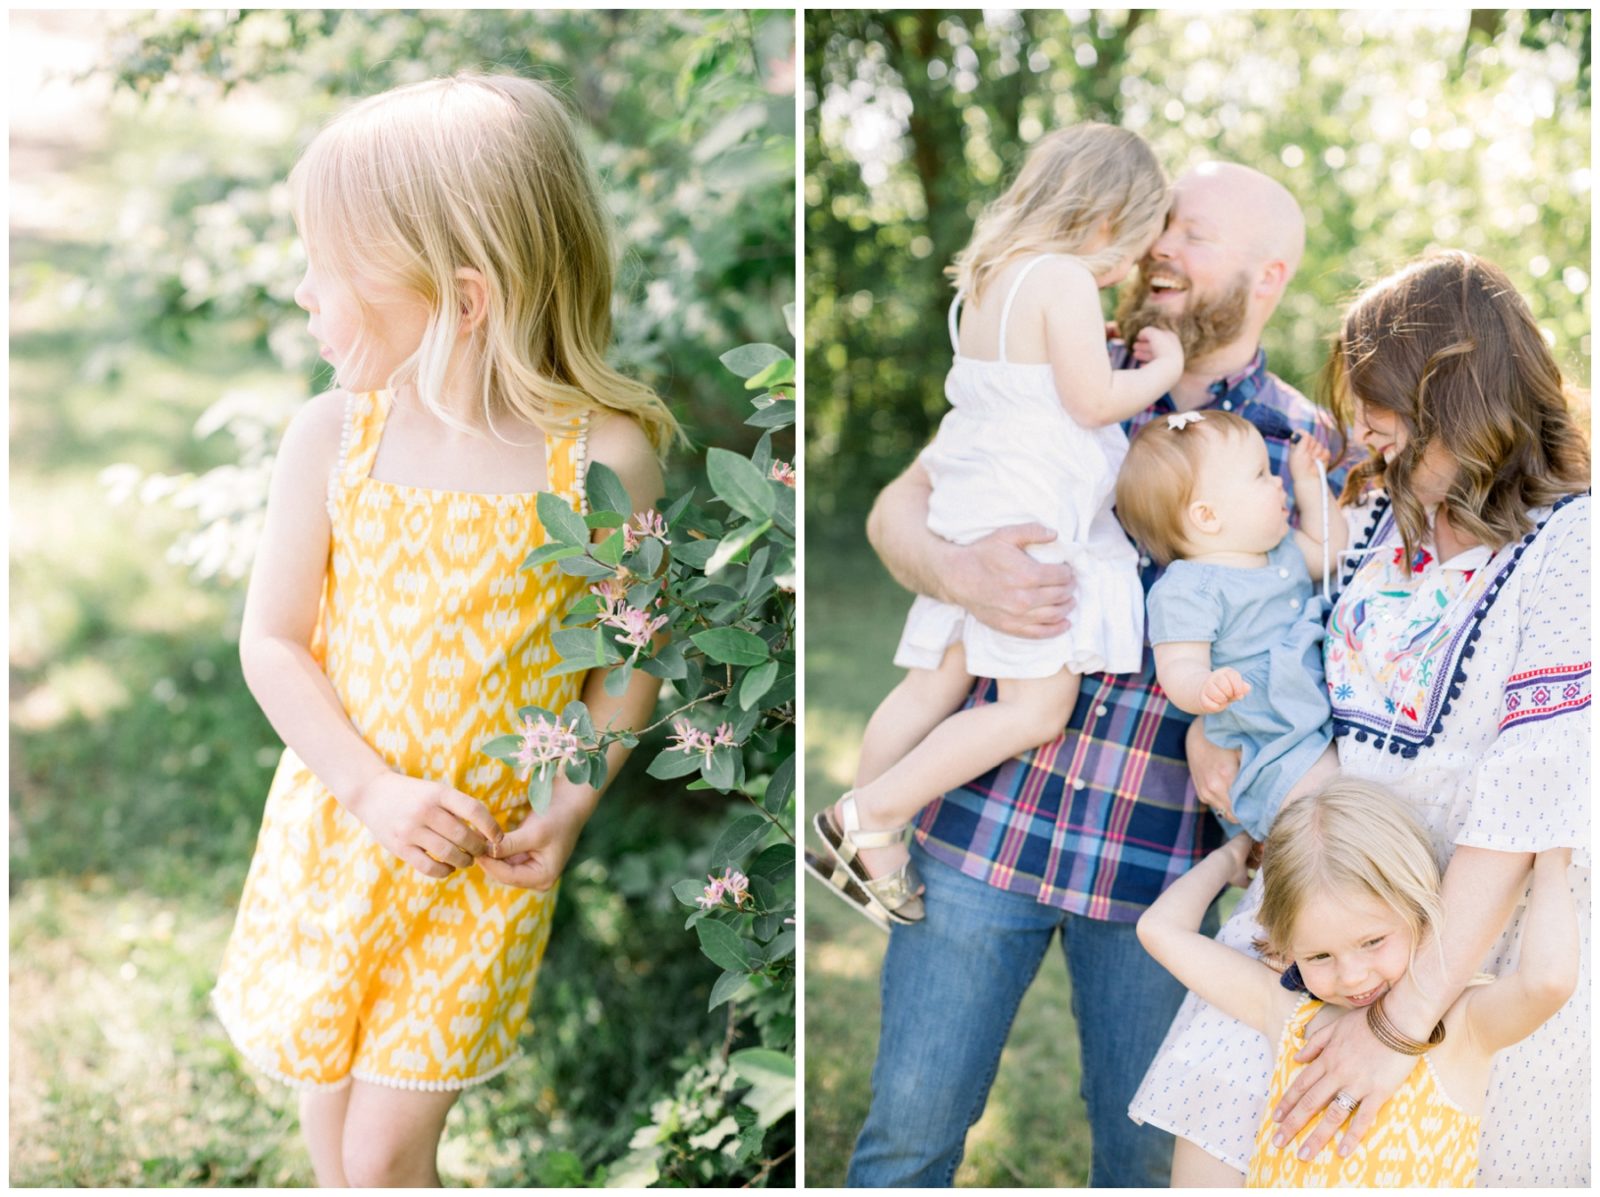 Two phots. One shows a little blonde girl in a yellow dress. The other shows a family together, smiling.